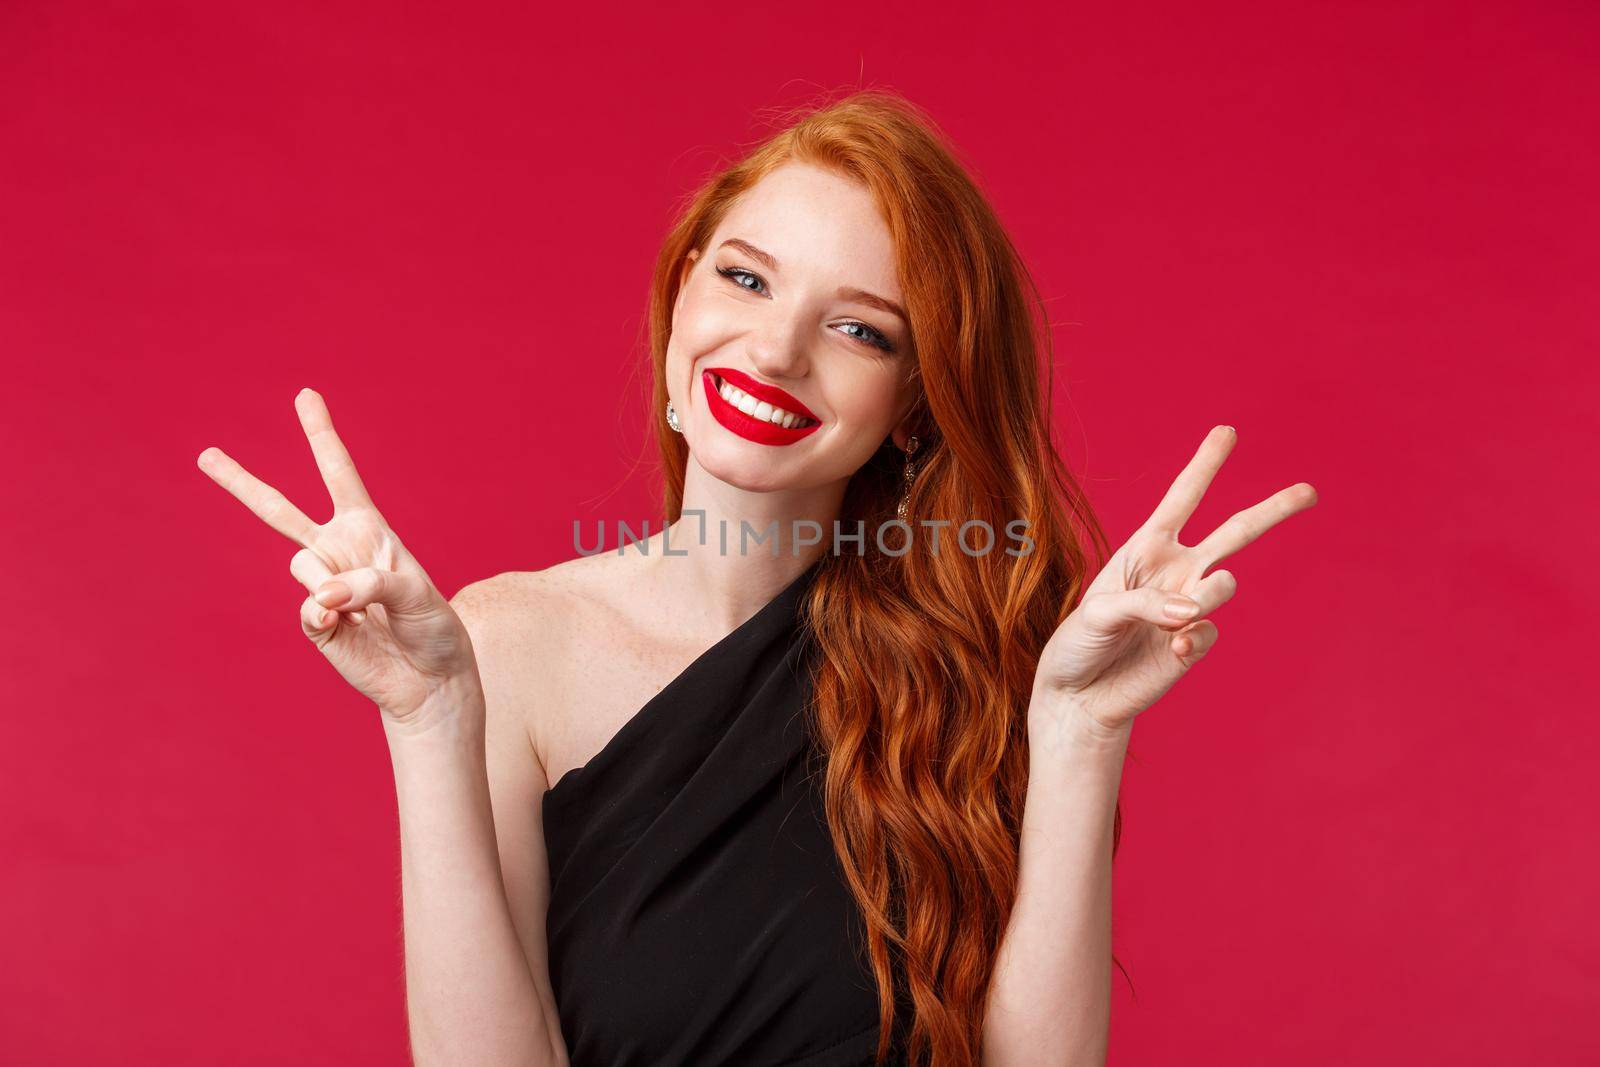 Close-up portrait of cheerful beautiful redhead woman in black dress, red lipstick, show kawaii peace signs, enjoying party, having fun, living a dream, standing red background upbeat.